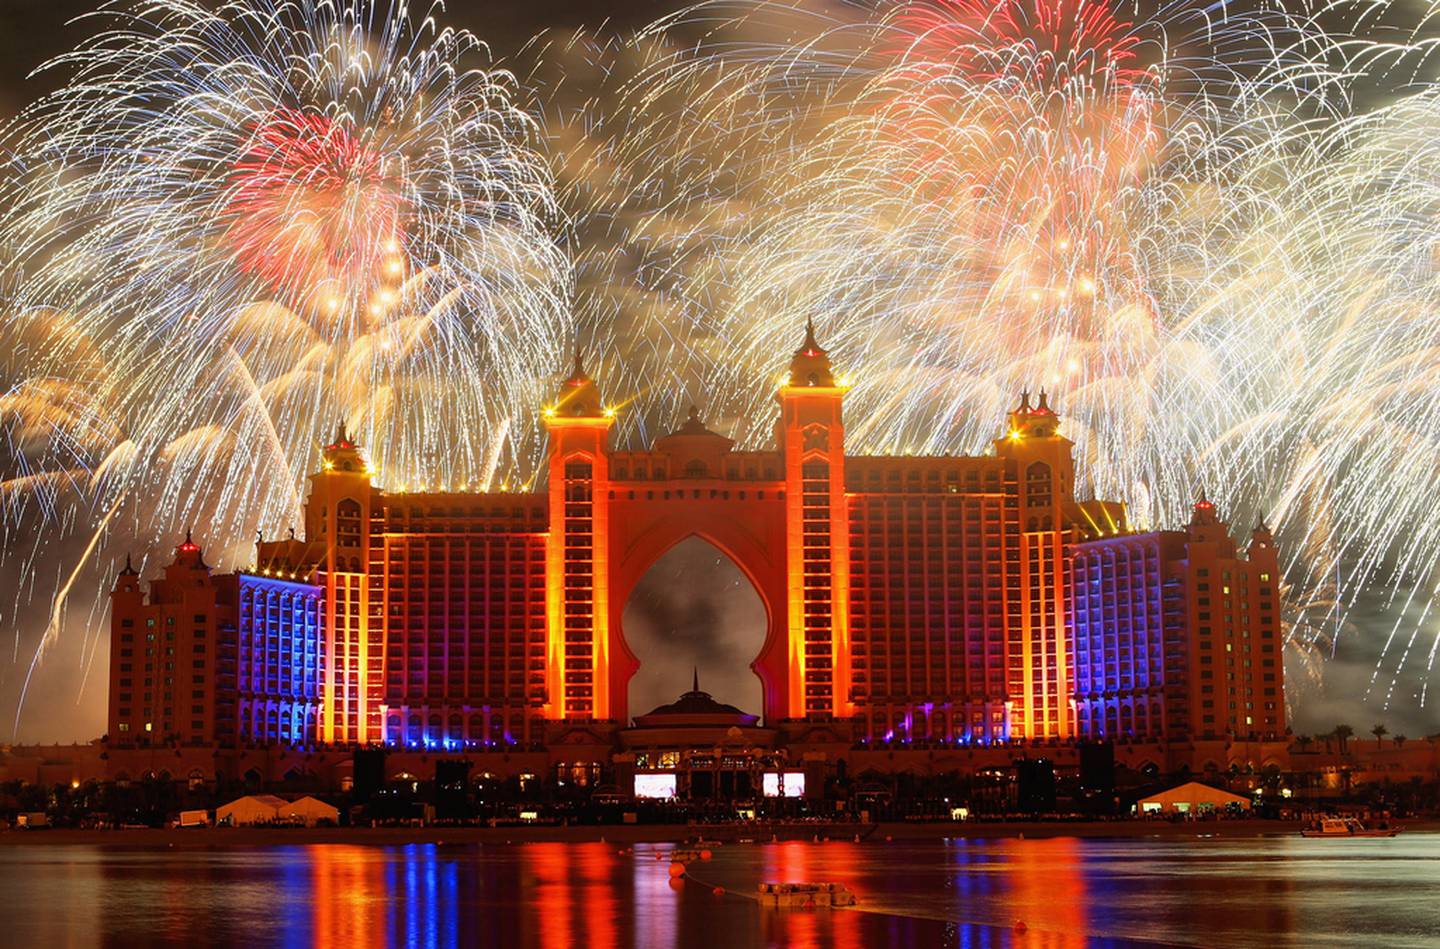 Fireworks over Atlantis, The Palm for New Year's Eve 2020. AFP